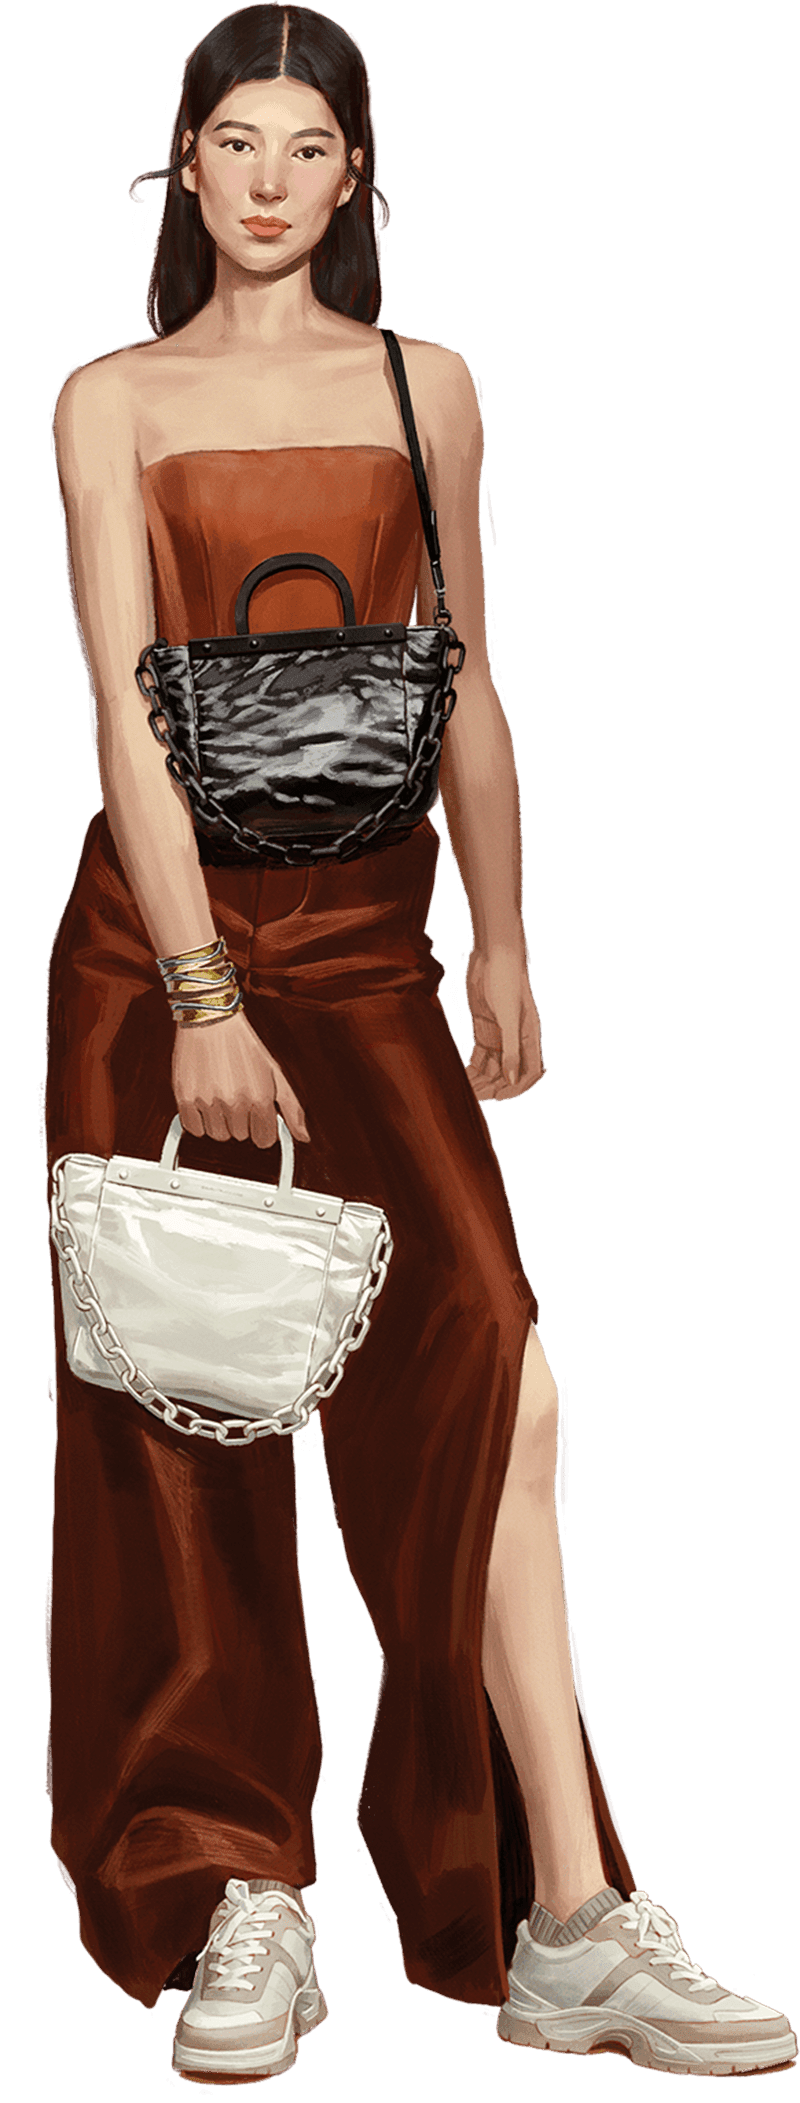 A compilation of illustrations from the CHARLES & KEITH Fall Winter 2020 campaign - CHARLES & KEITH - Web - Model 3